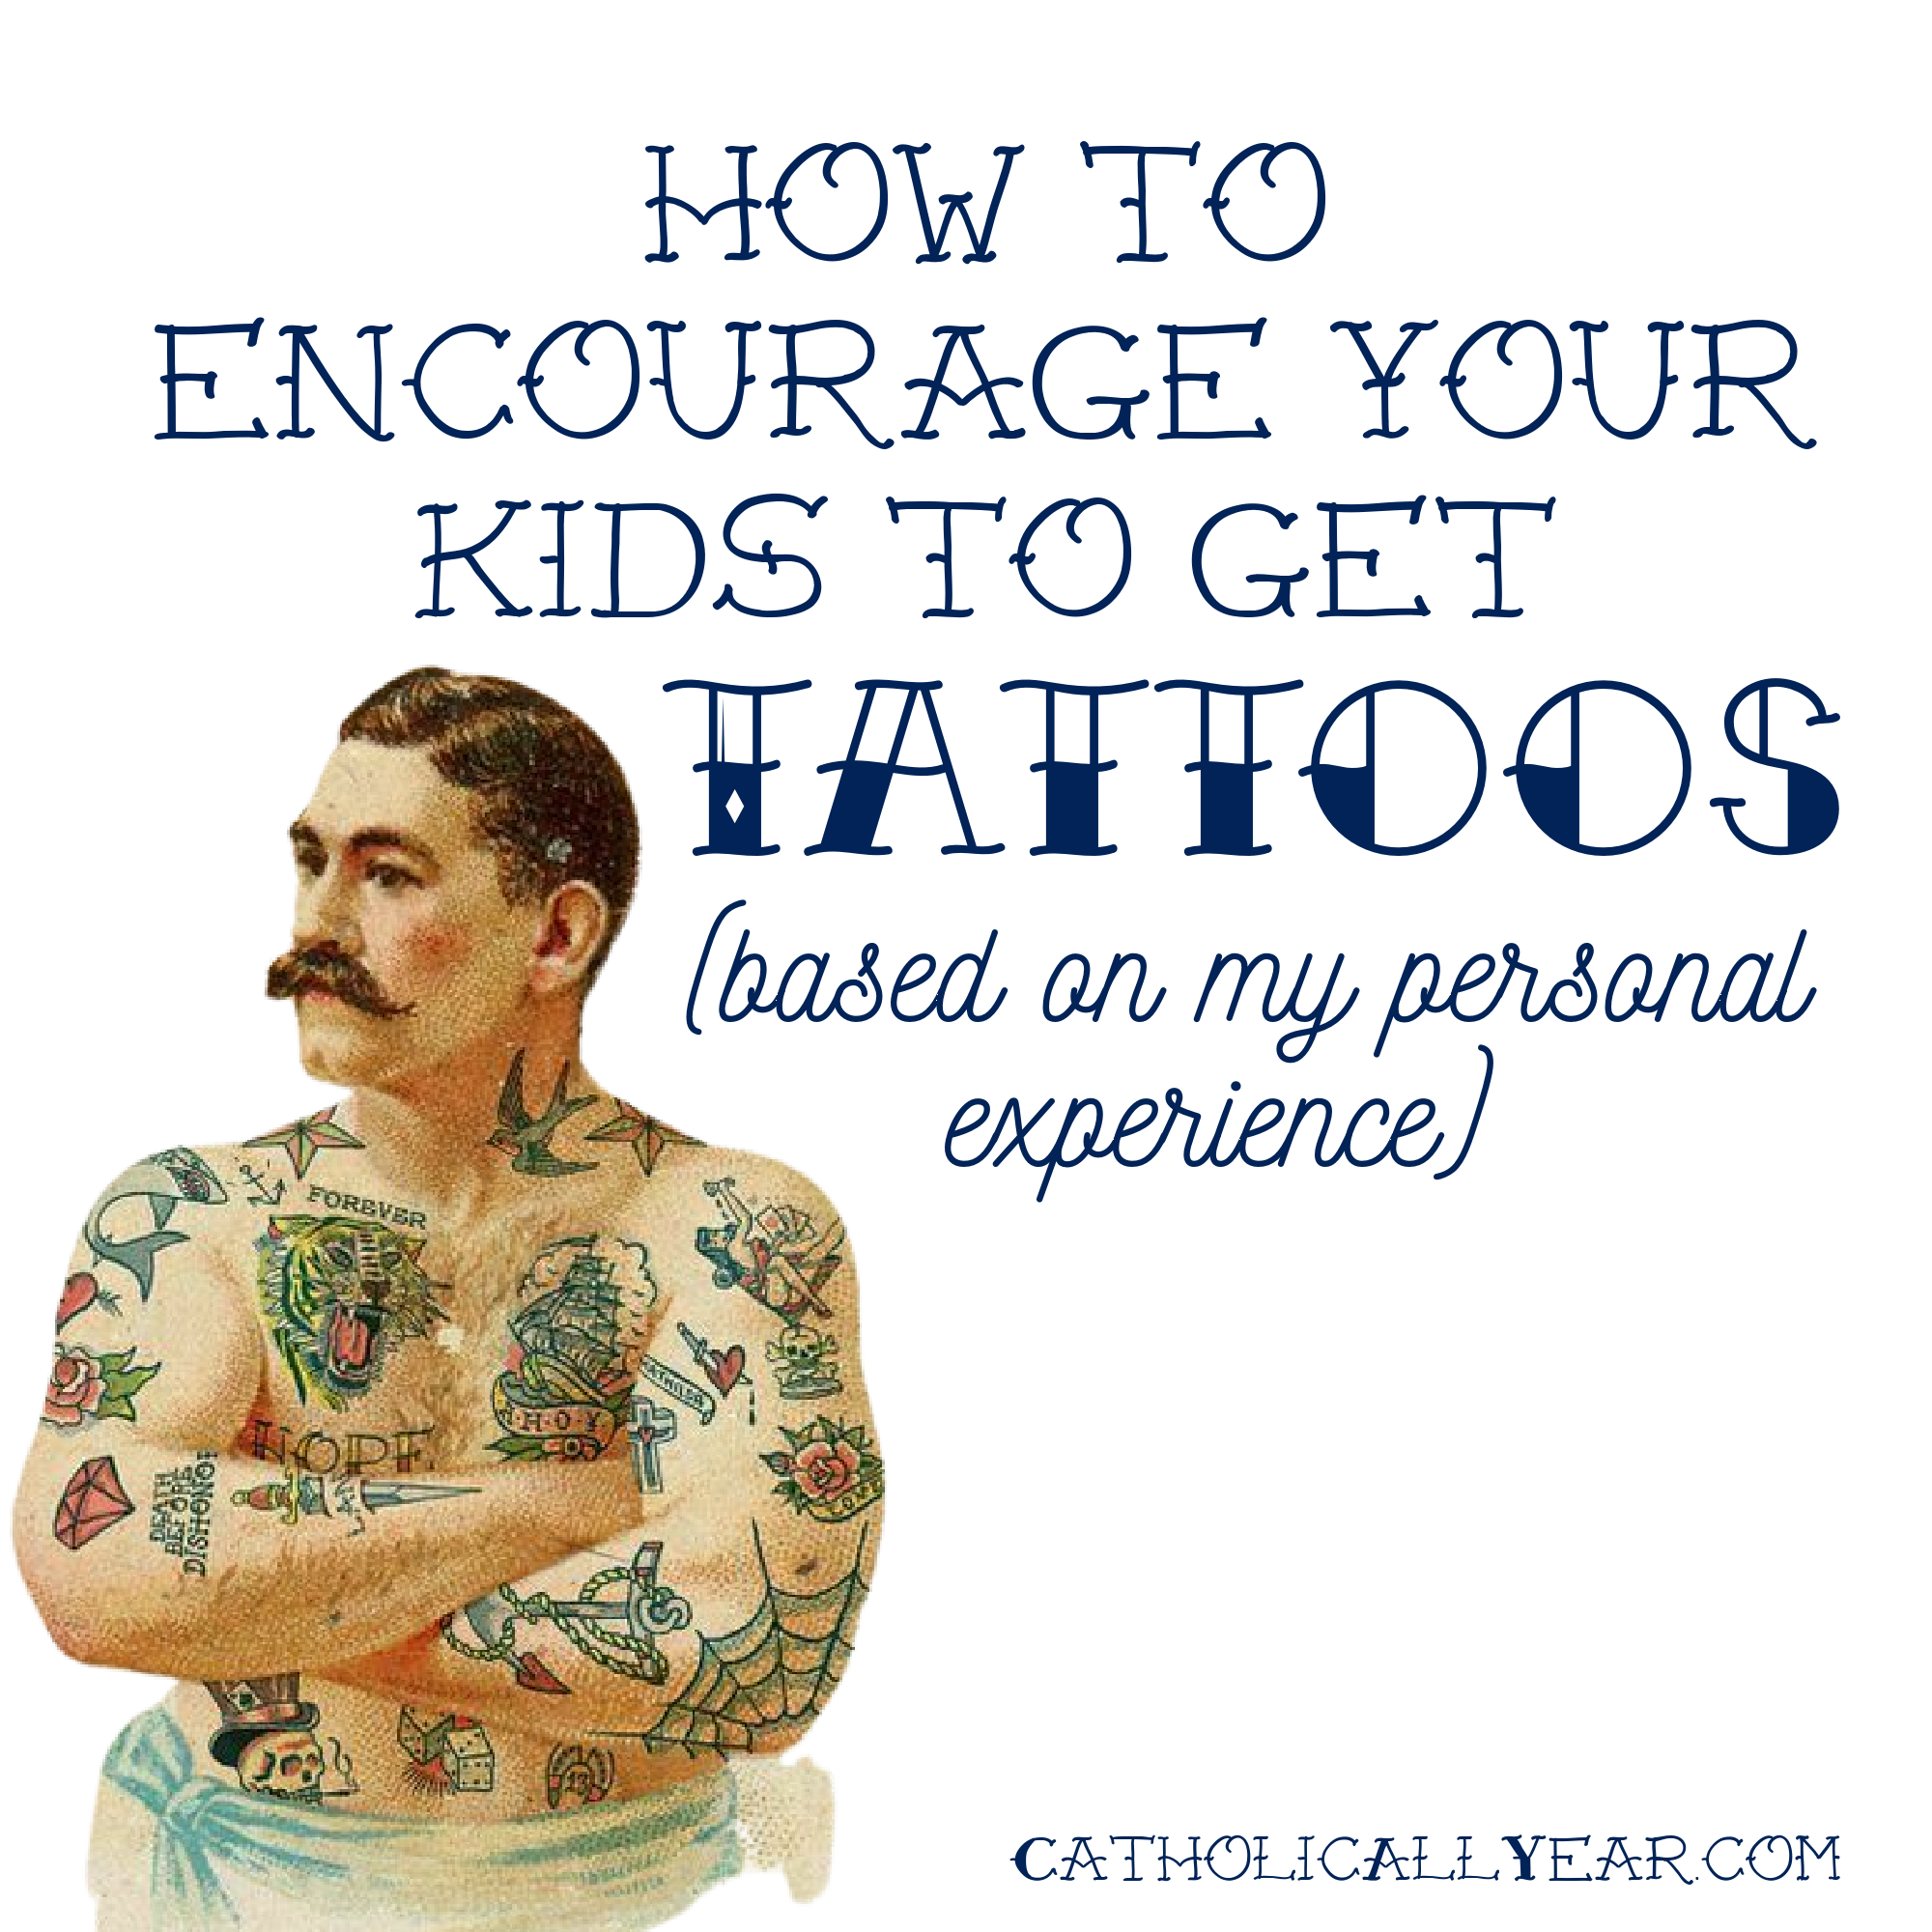 How to Encourage Your Kids to Get Tattoos (based on my personal experience)